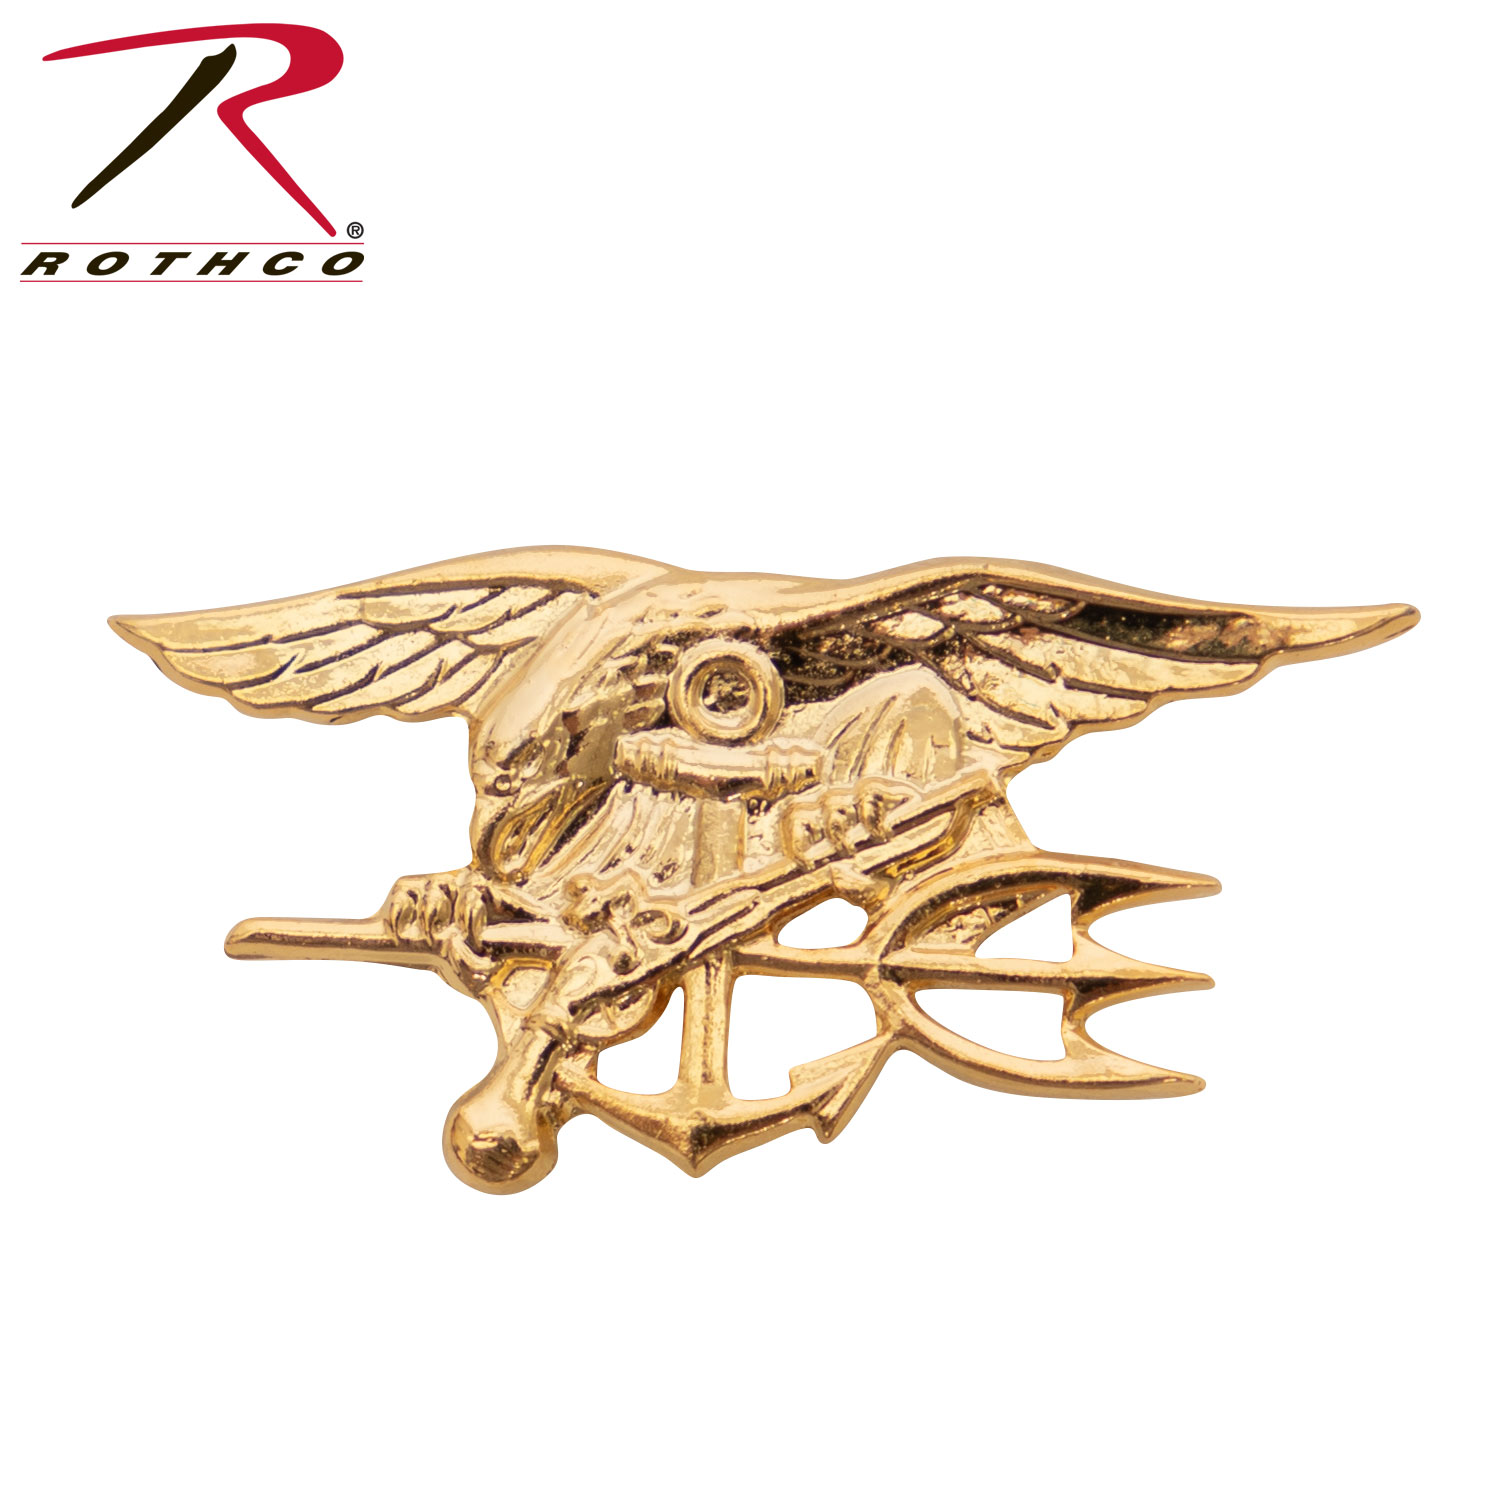 Rothco Navy SEAL Gold Trident Label Pin